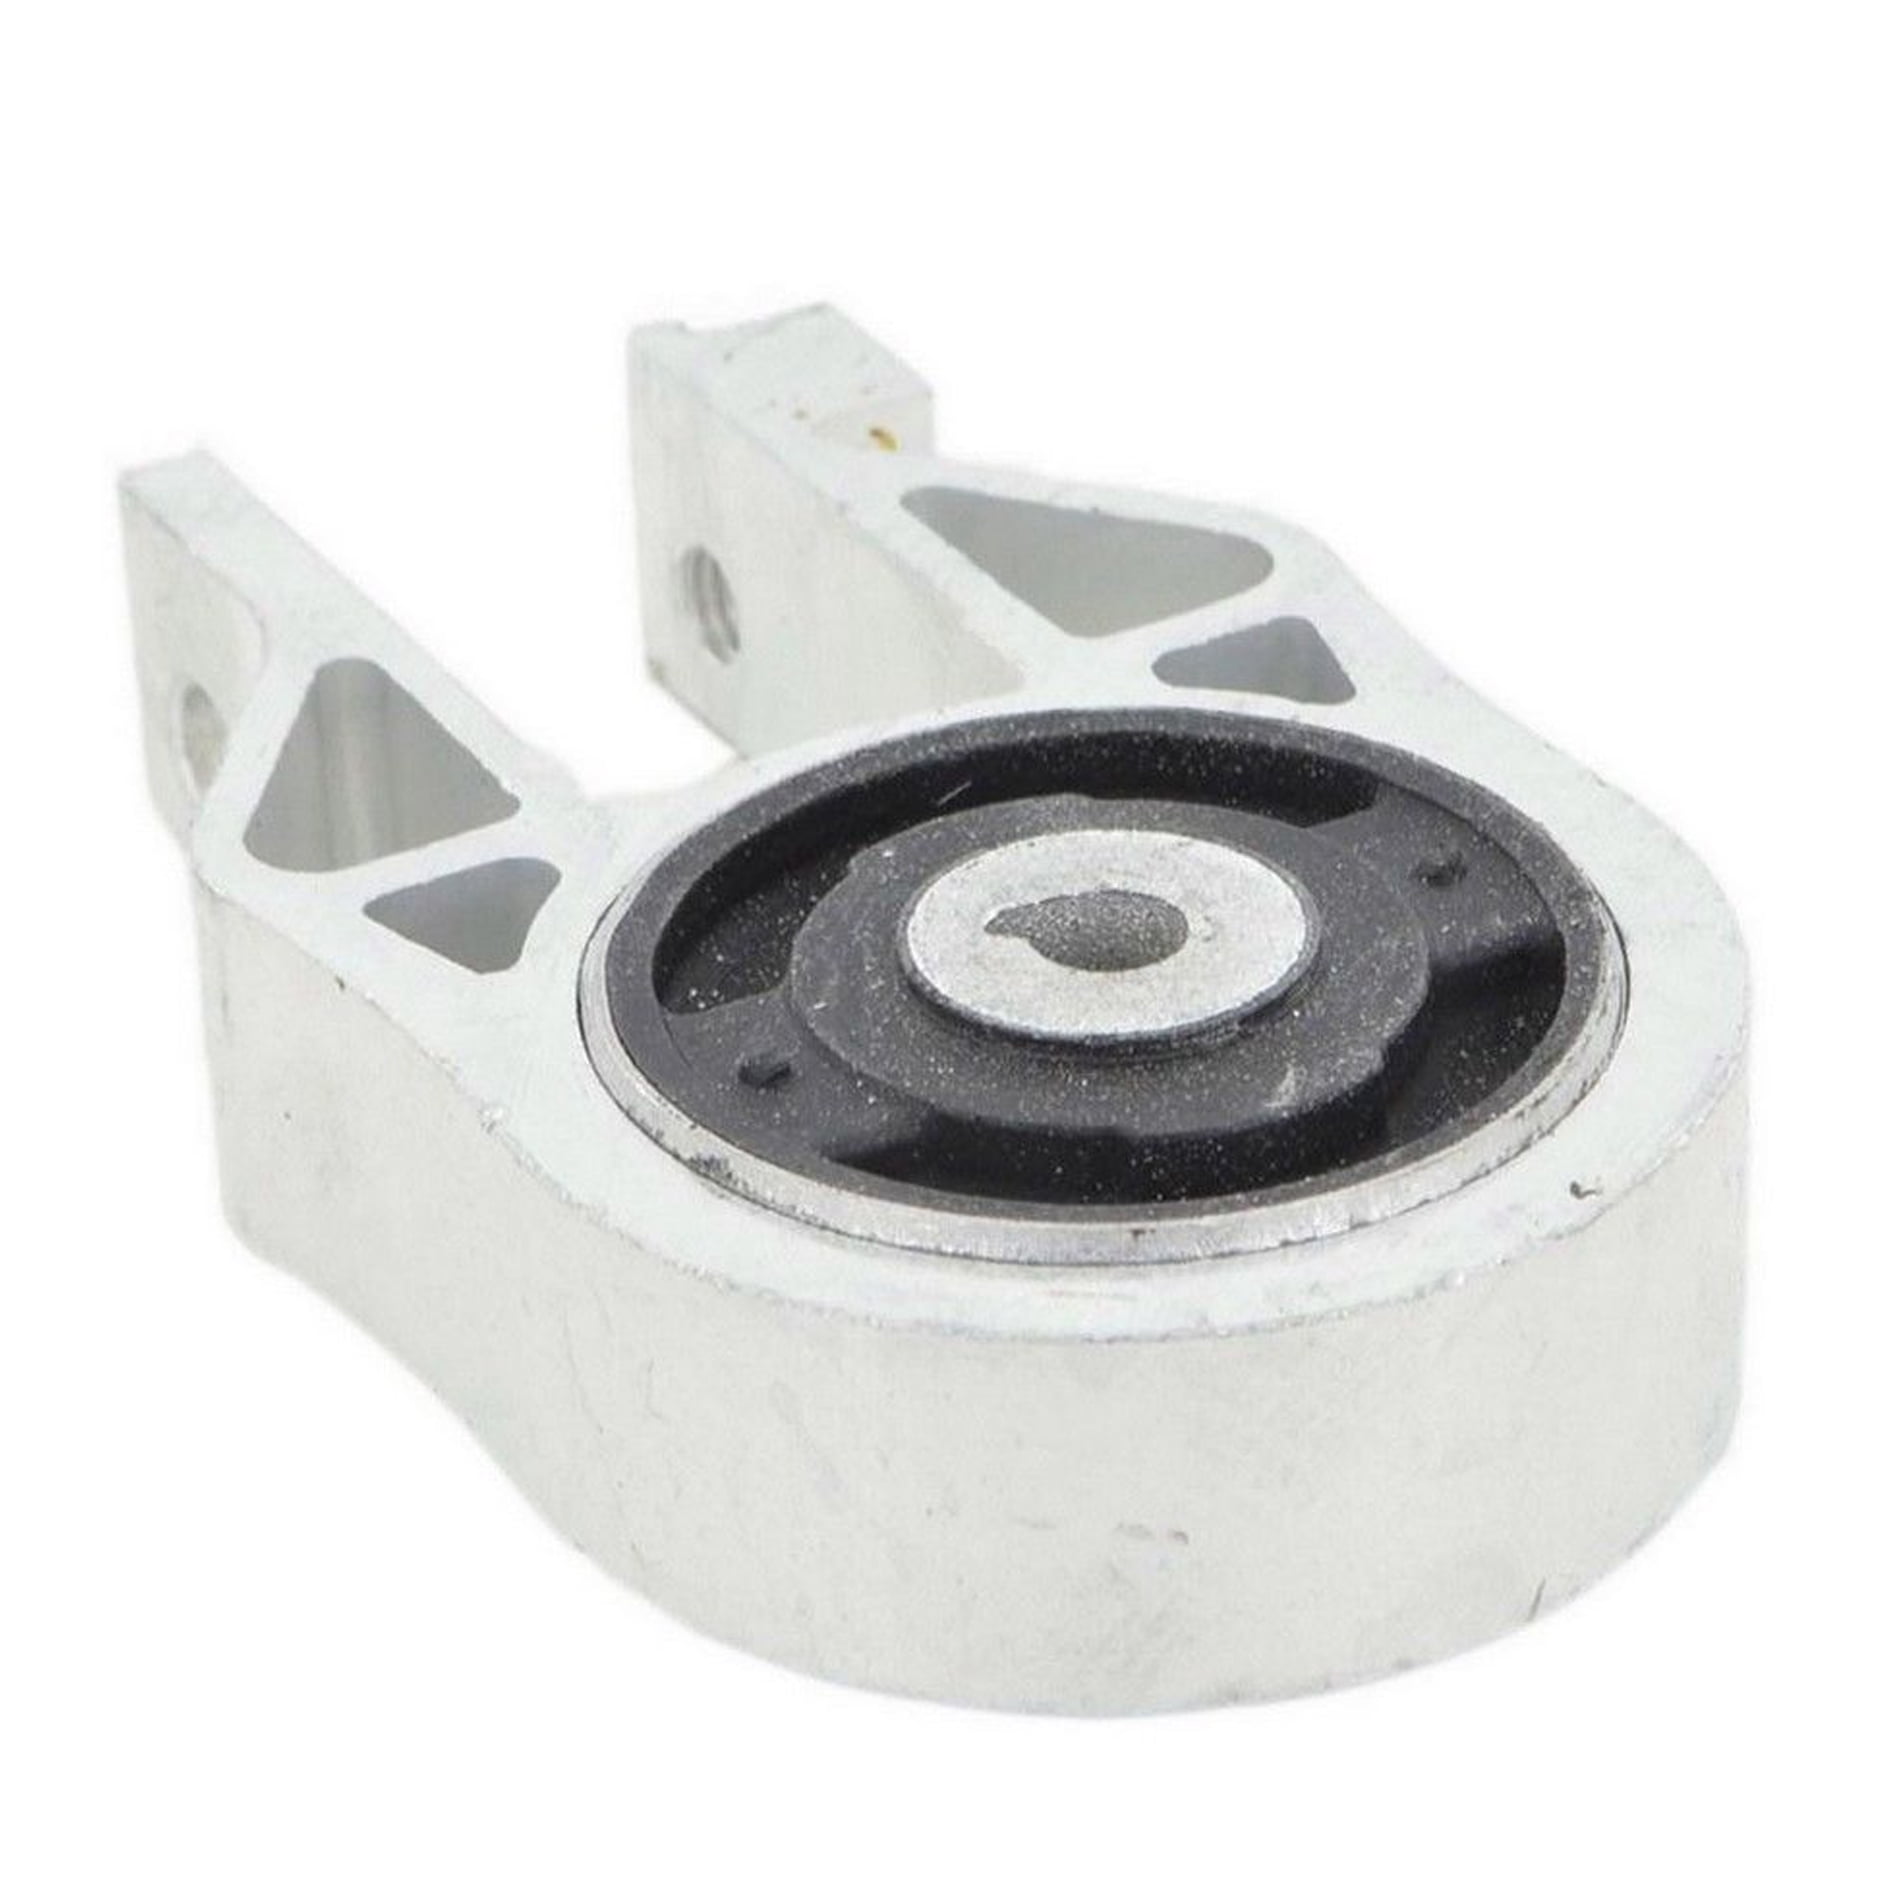 Lower Transmission Mount For Ford Transit Connect Escape 1.6L 2.5L 5520 NEW